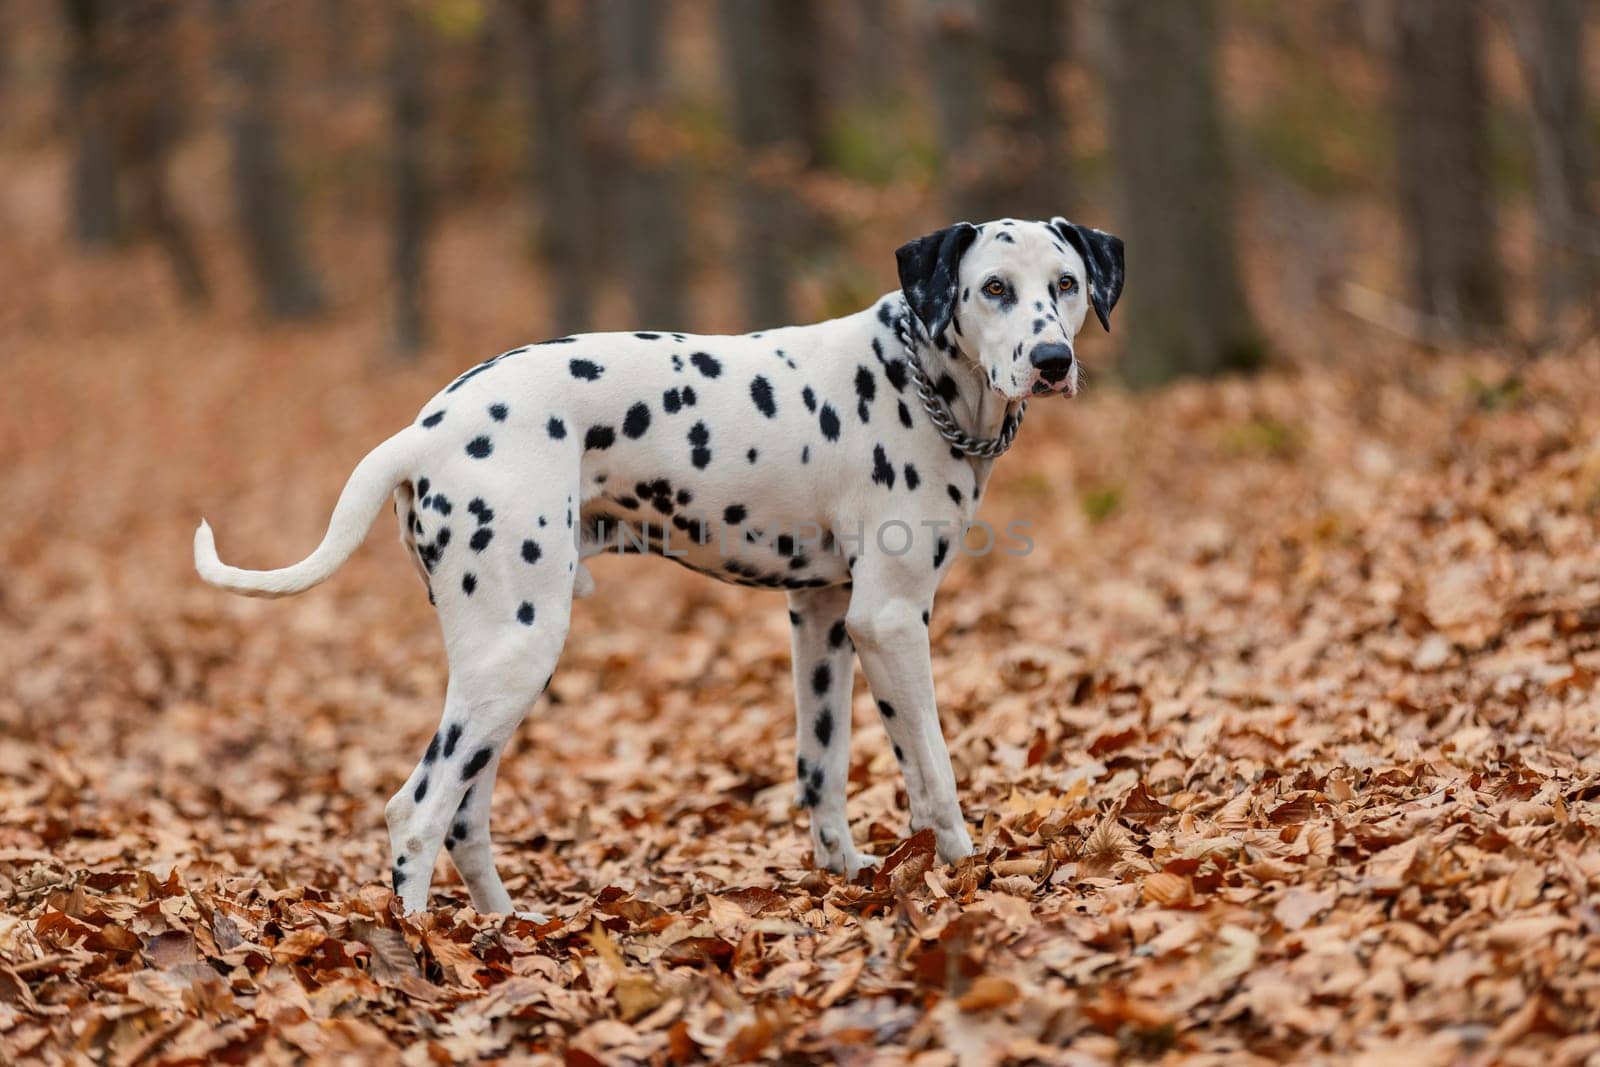 Dalmatian dog in autumn forest by zokov